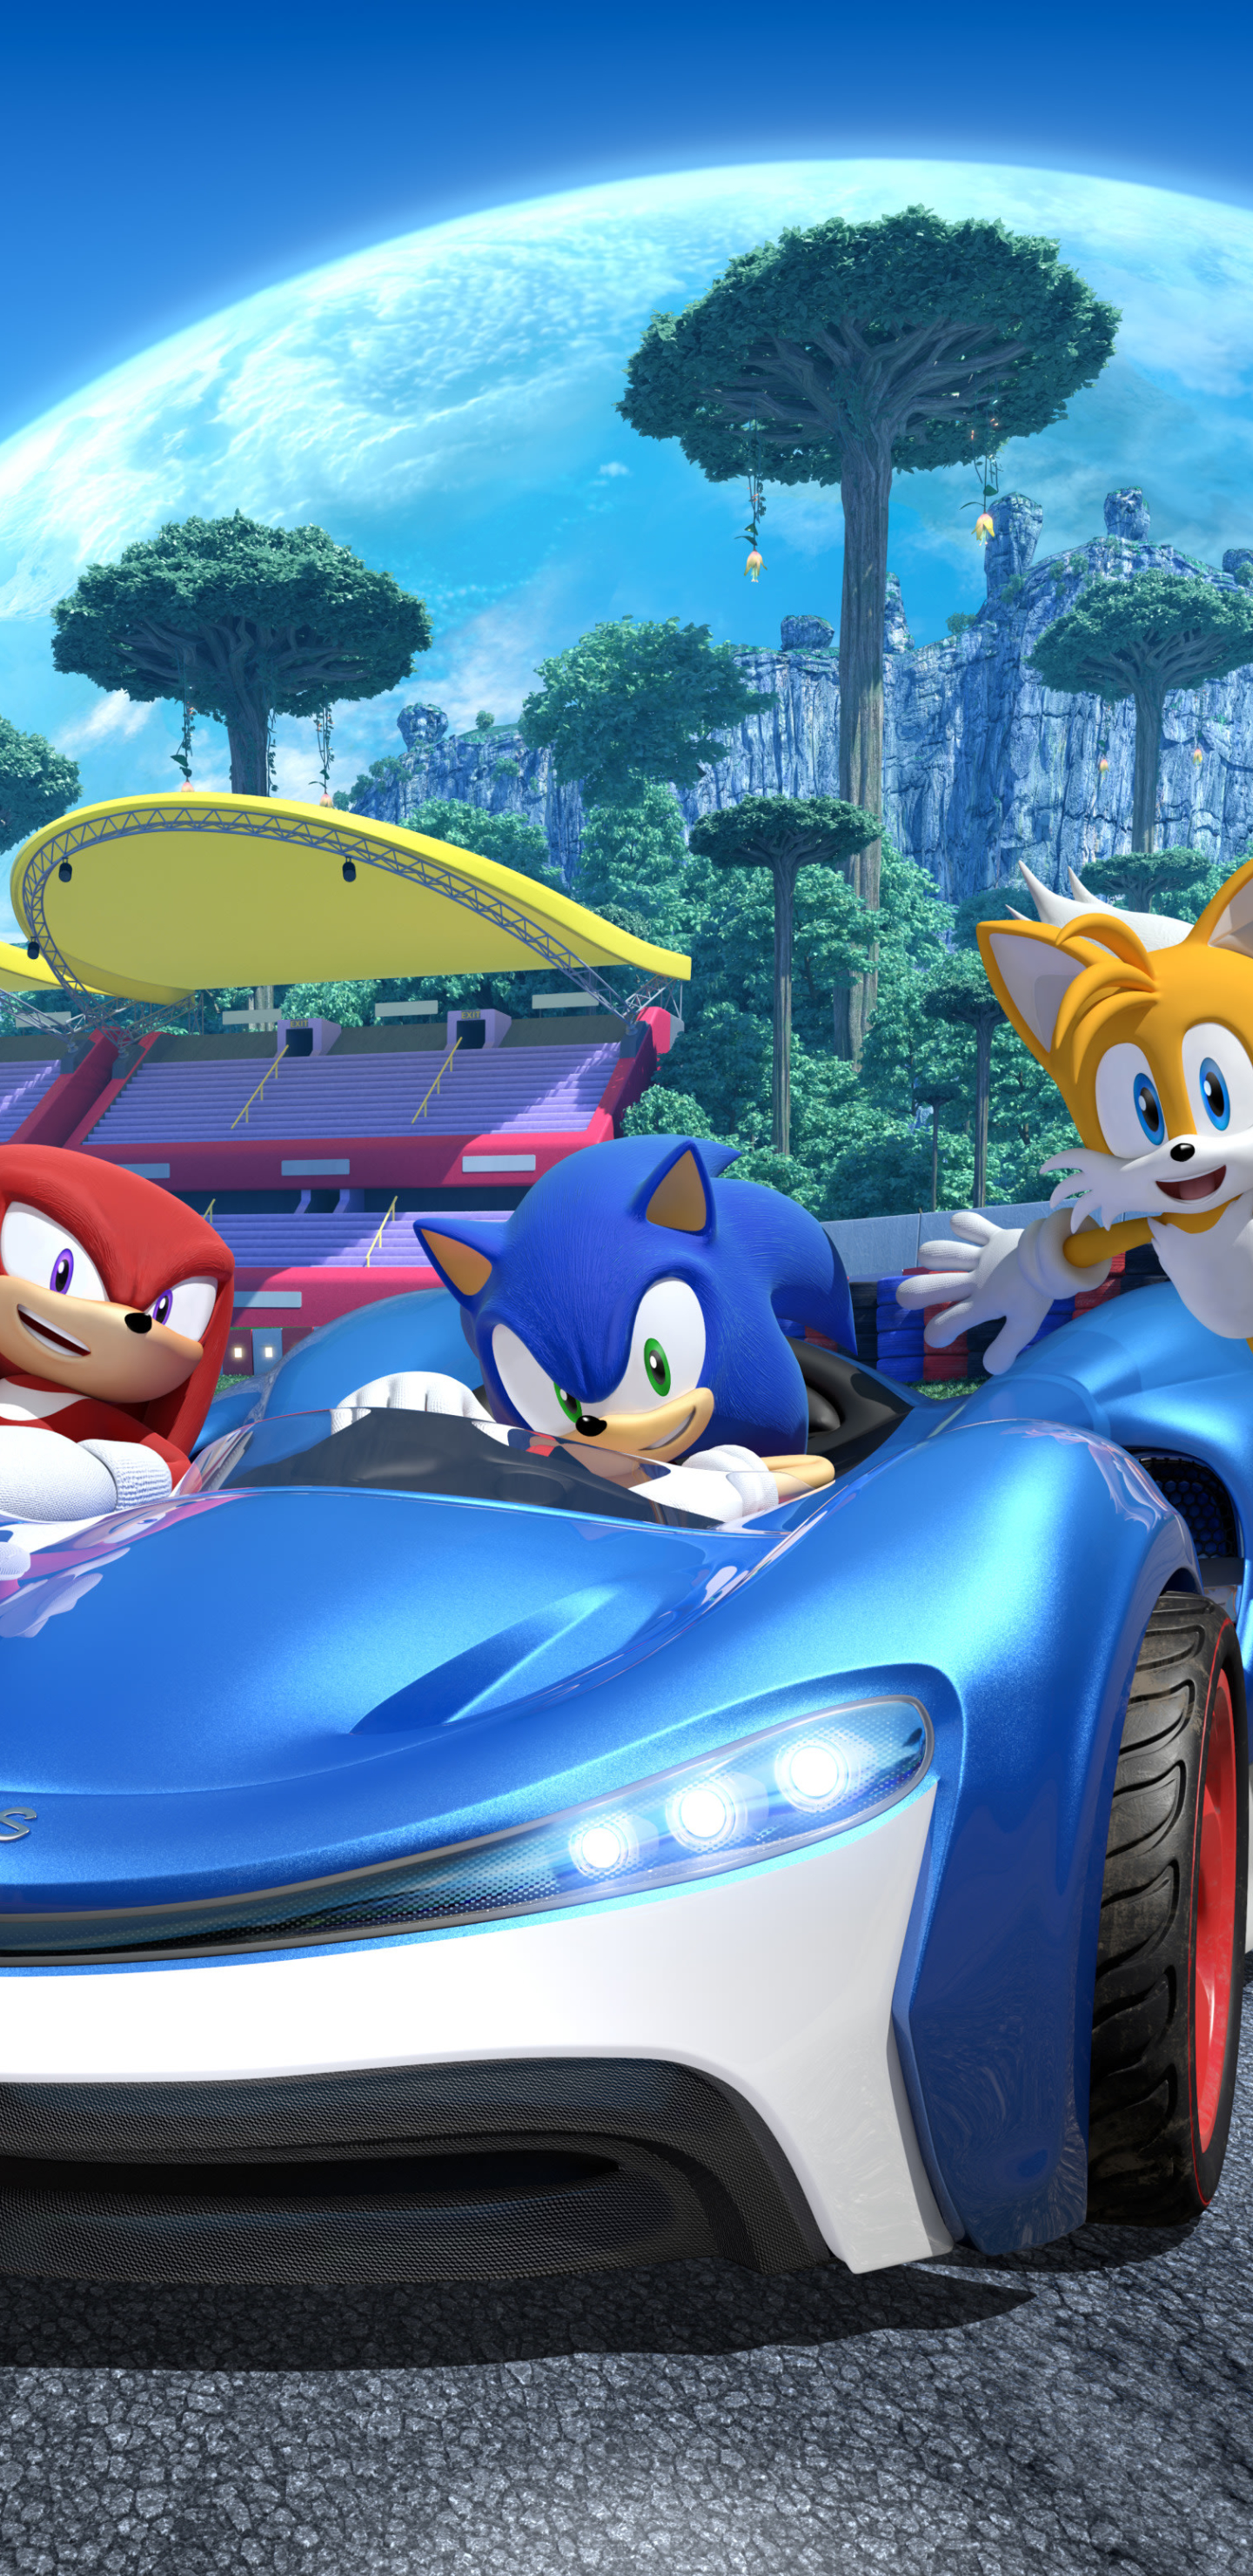 video game, team sonic racing, sonic the hedgehog, knuckles the echidna, miles 'tails' prower